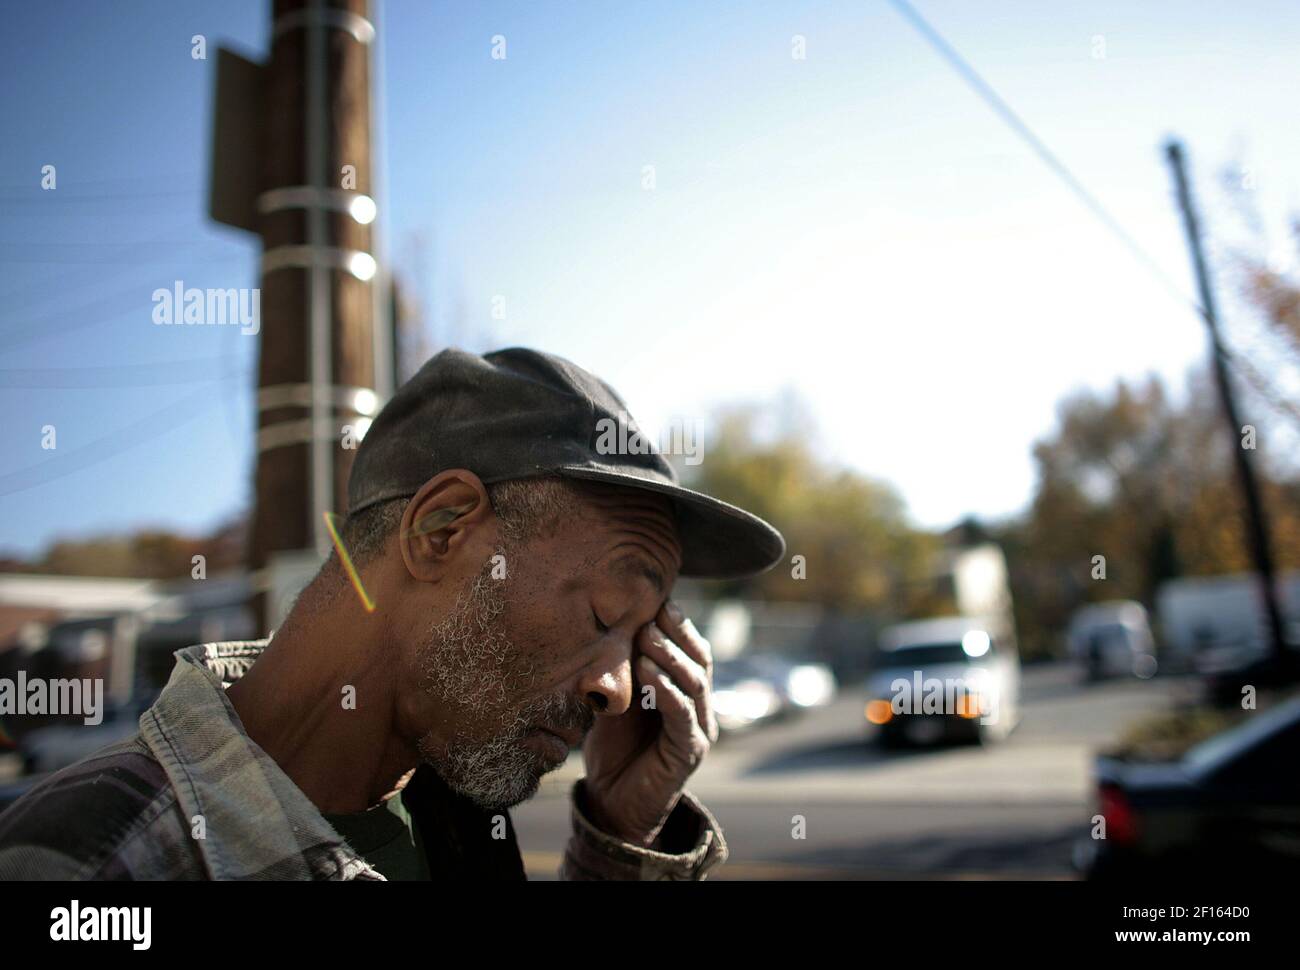 John Treece, 60, leaves the Bread for the City food pantry in the Anacostia section of Washington, DC, on November 2, 2006. The share of poor Americans living in deep poverty has reached a 32-year high, while millions of middle-income Americans have fallen closer to the poverty line due to what one researcher calls a 'sinkhole effect' on income. Washington, D.C., has the highest concentration of severely poor people among all states, 10.8 percent. (Photo by Chuck Kennedy/MCT/Sipa USA) Stock Photo